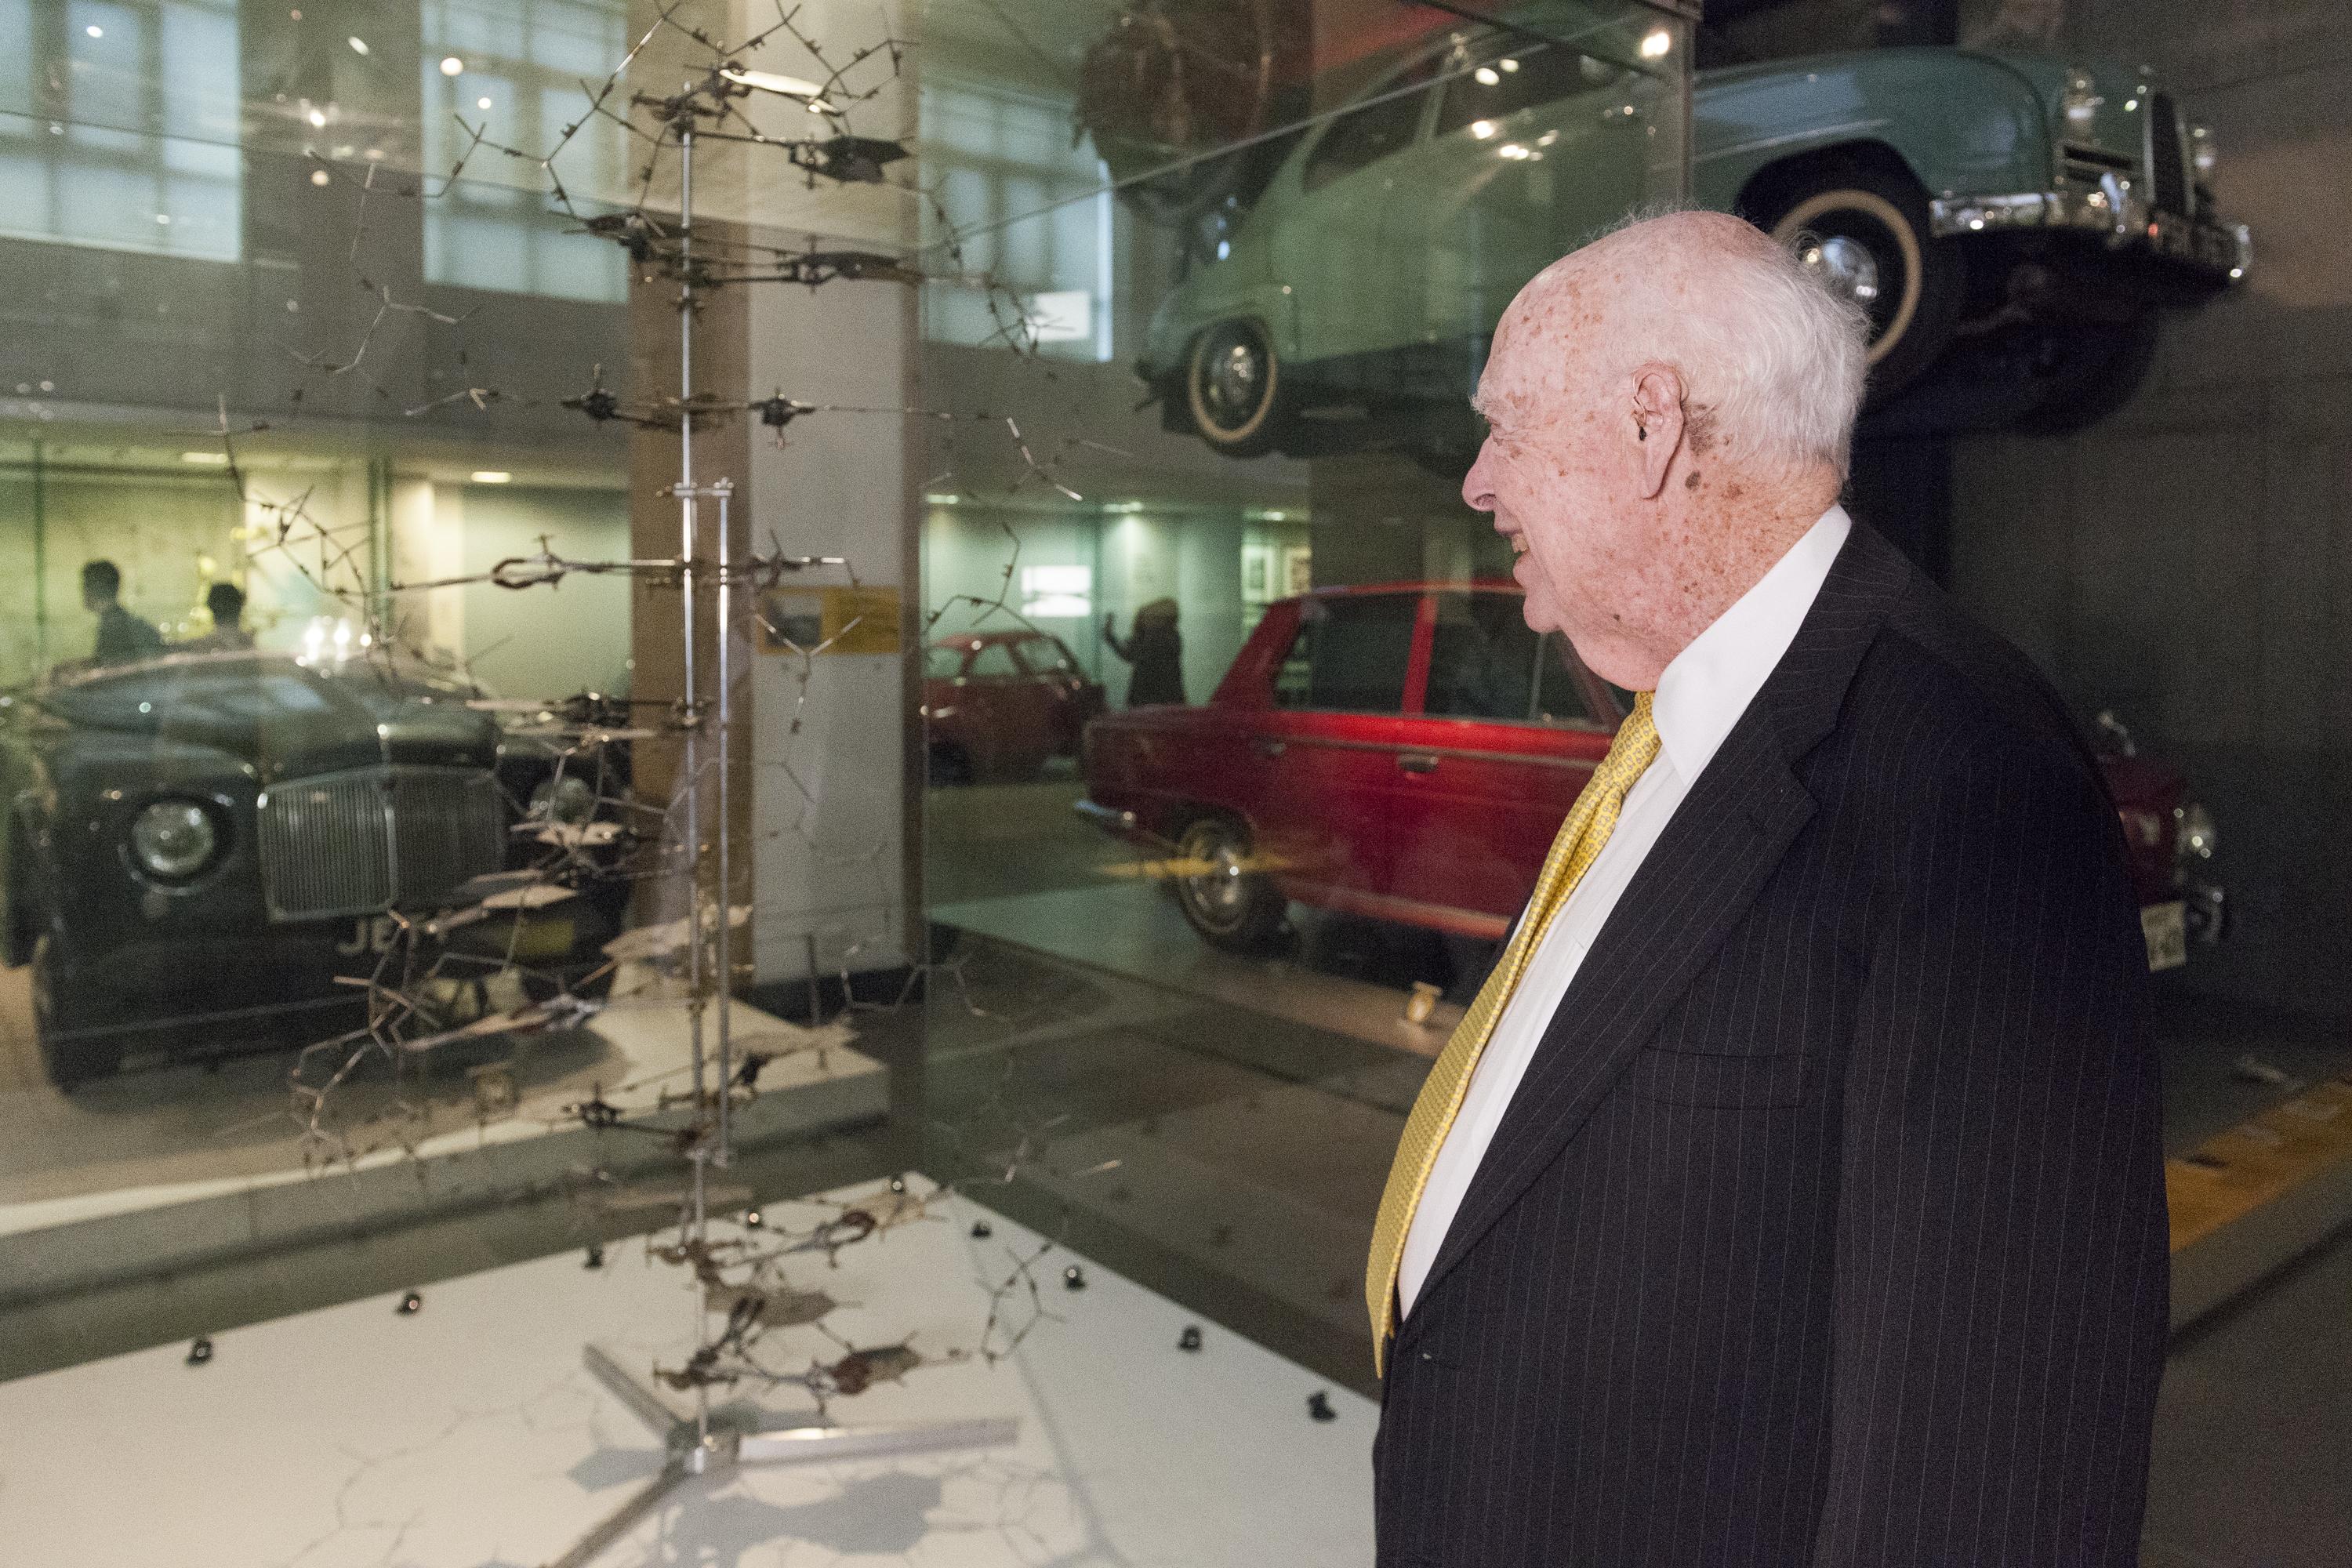 Portrait of James Watson, American molecular biologist, geneticist and zoologist, best known as one of the co-discoverers of the structure of DNA in 1953 with Francis Crick and Rosalind Franklin. Pictured in the Museums Making the Modern World Gallery with E1999.597.1 Replica of the Crick and Watson DNA model, by Science Museum, Workshops, South Kensington, London, England, 1996